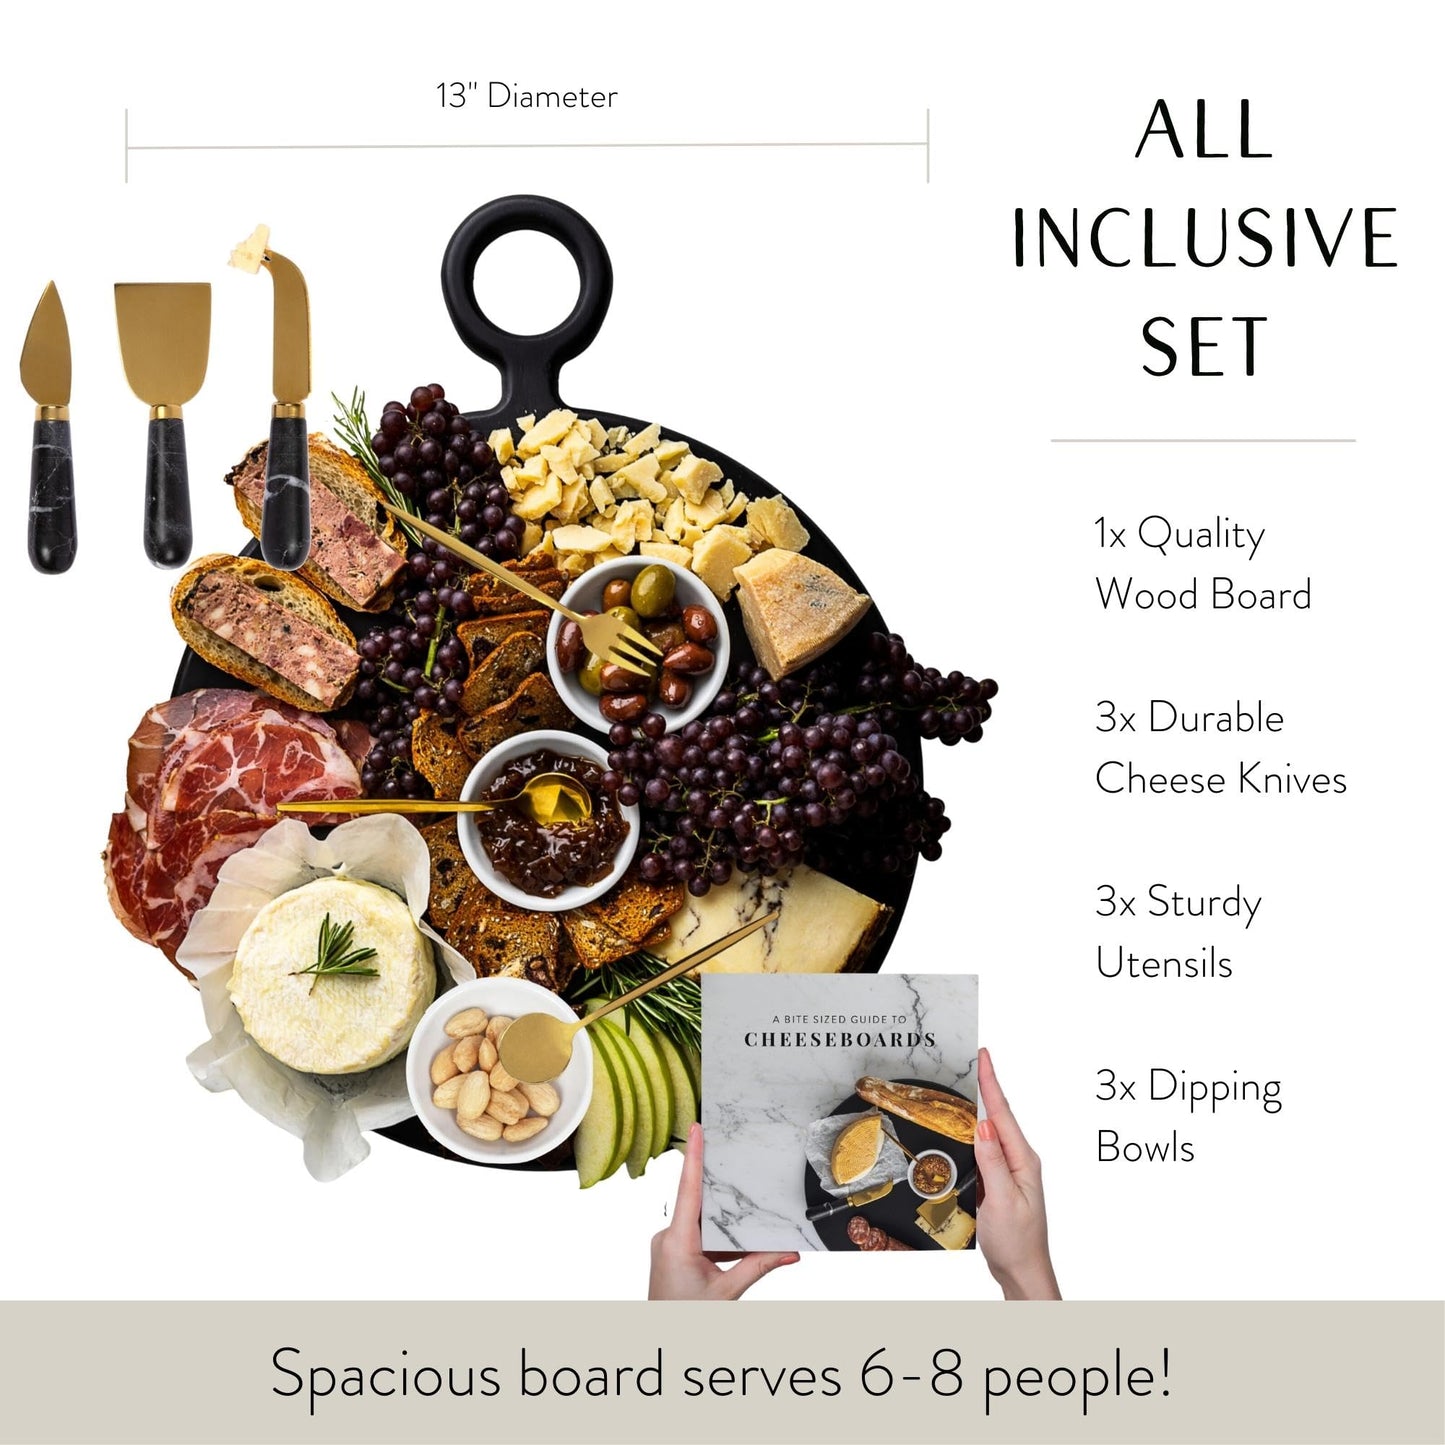 The 10 Piece Cheese and Charcuterie Board Set